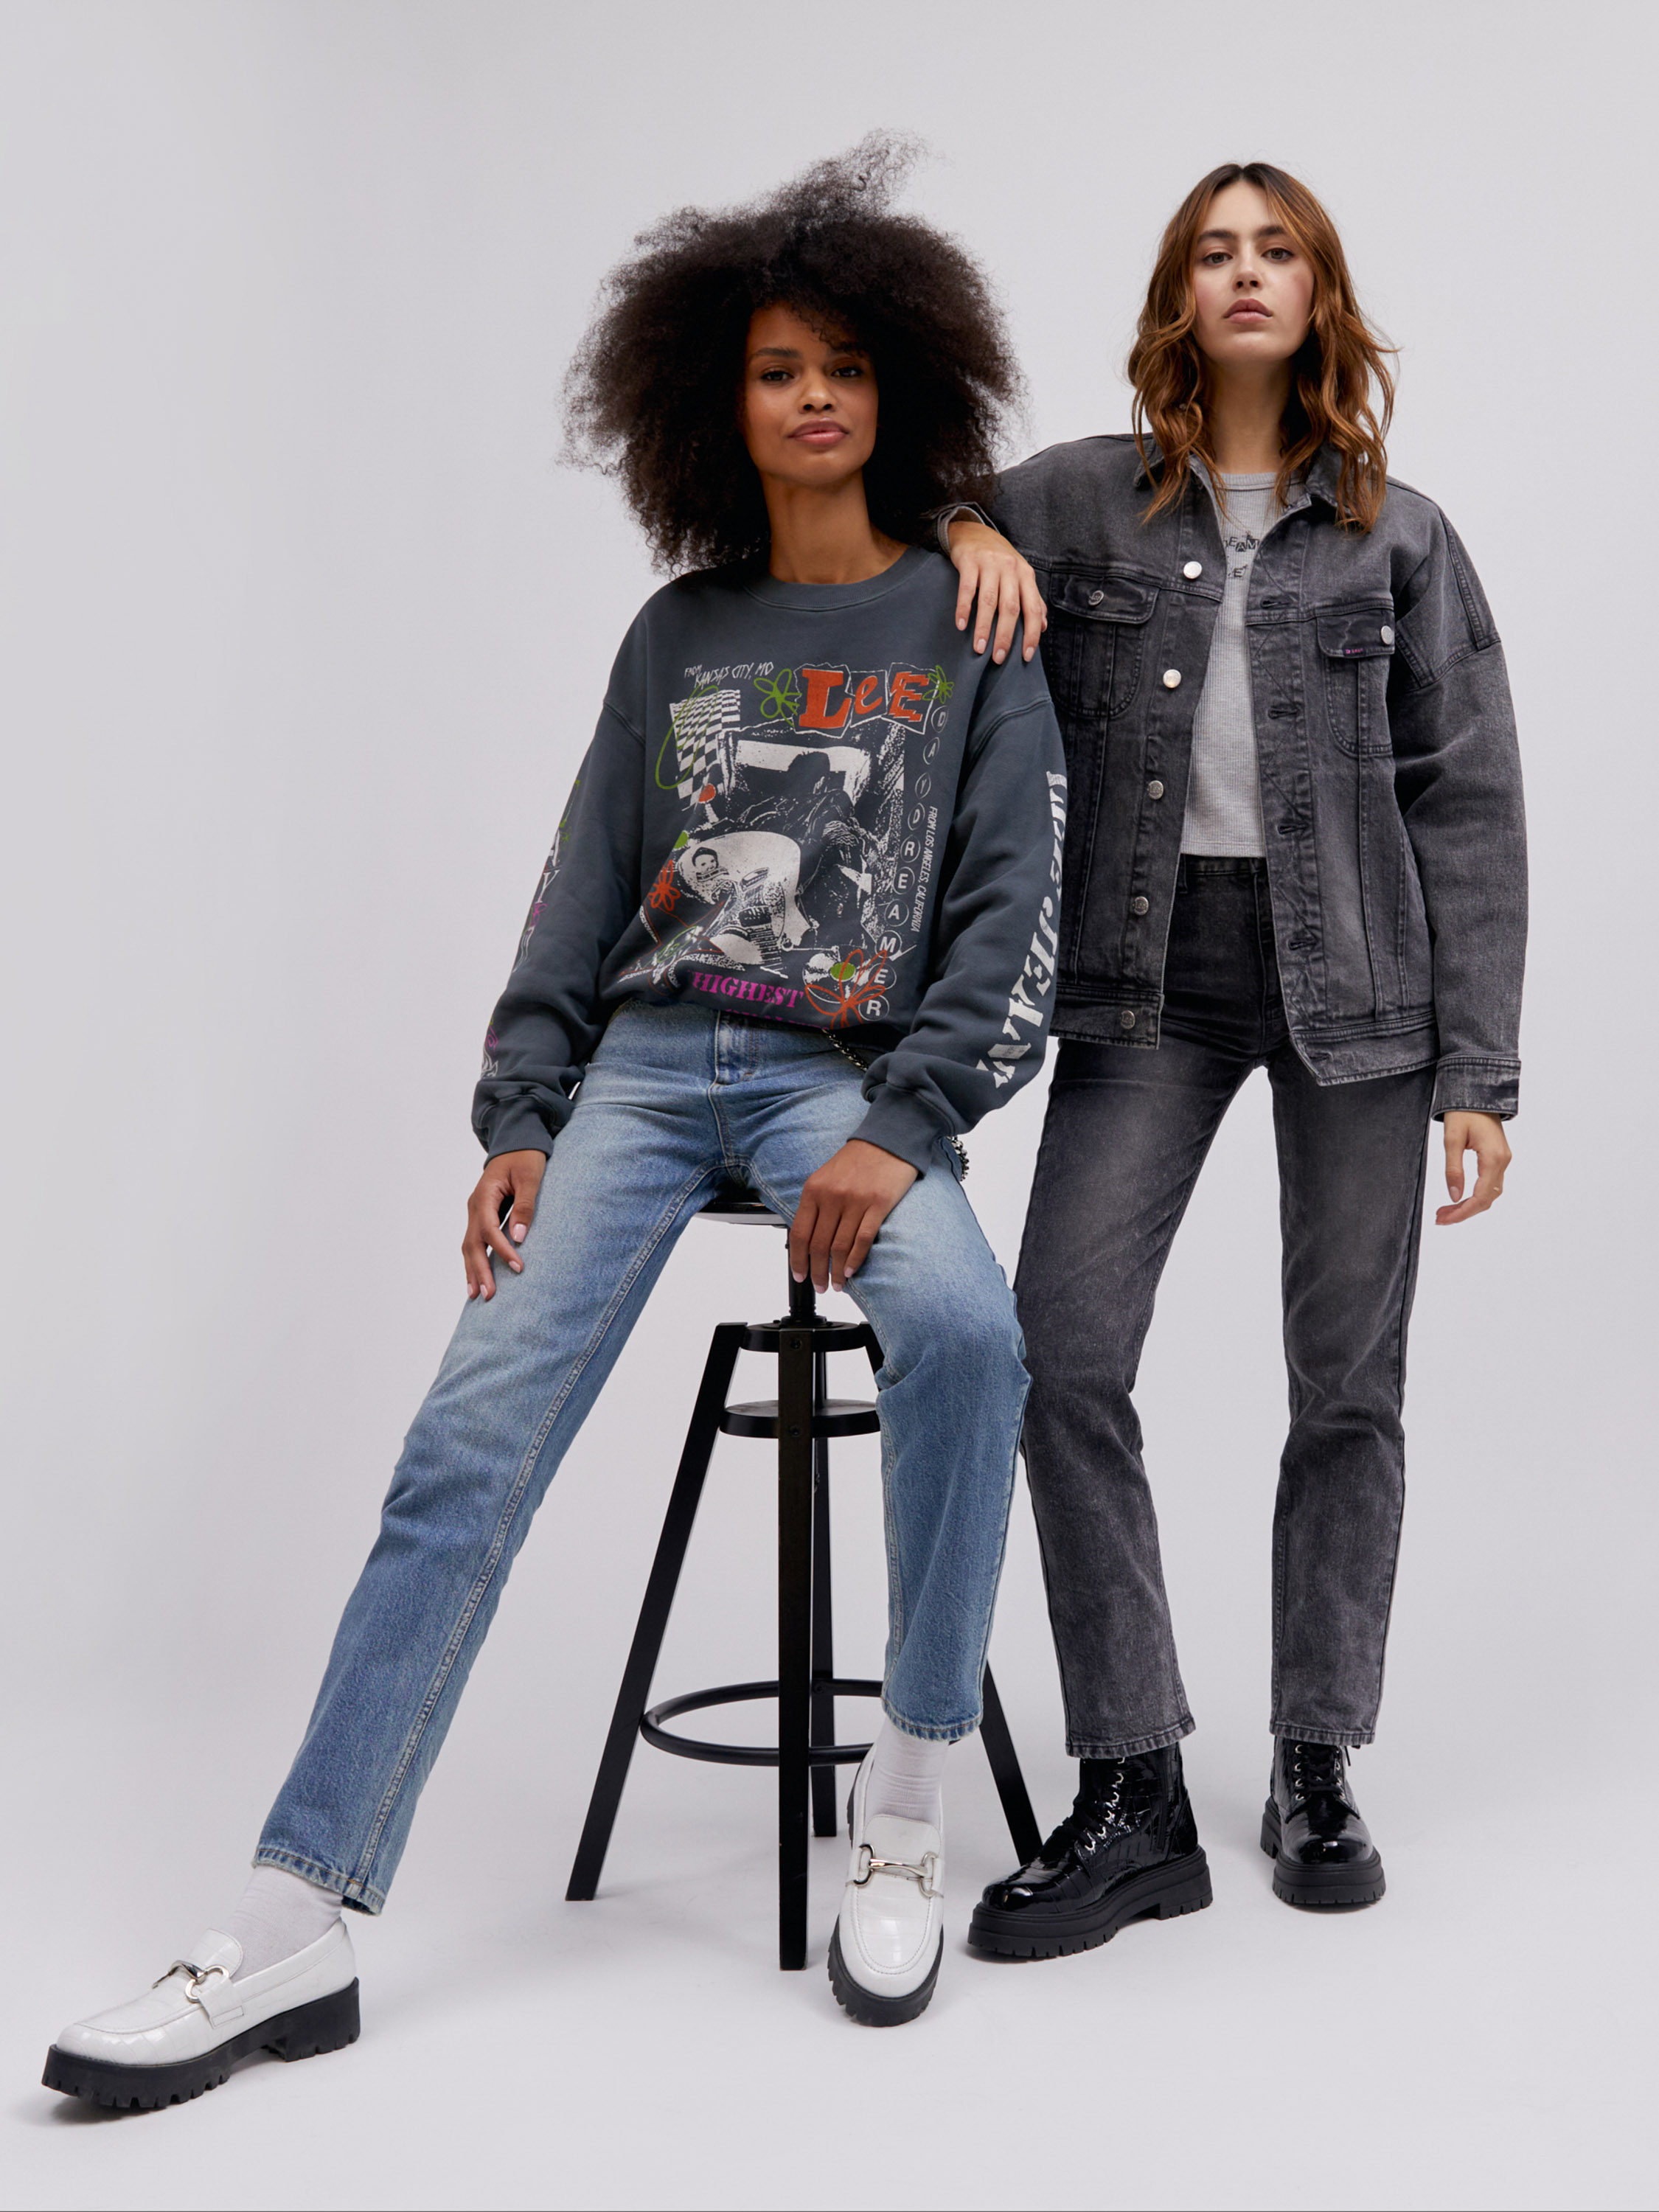 Billabong With The Band Women's Denim Jackets (Brand New) – Haustrom.com |  Shop Action Sports